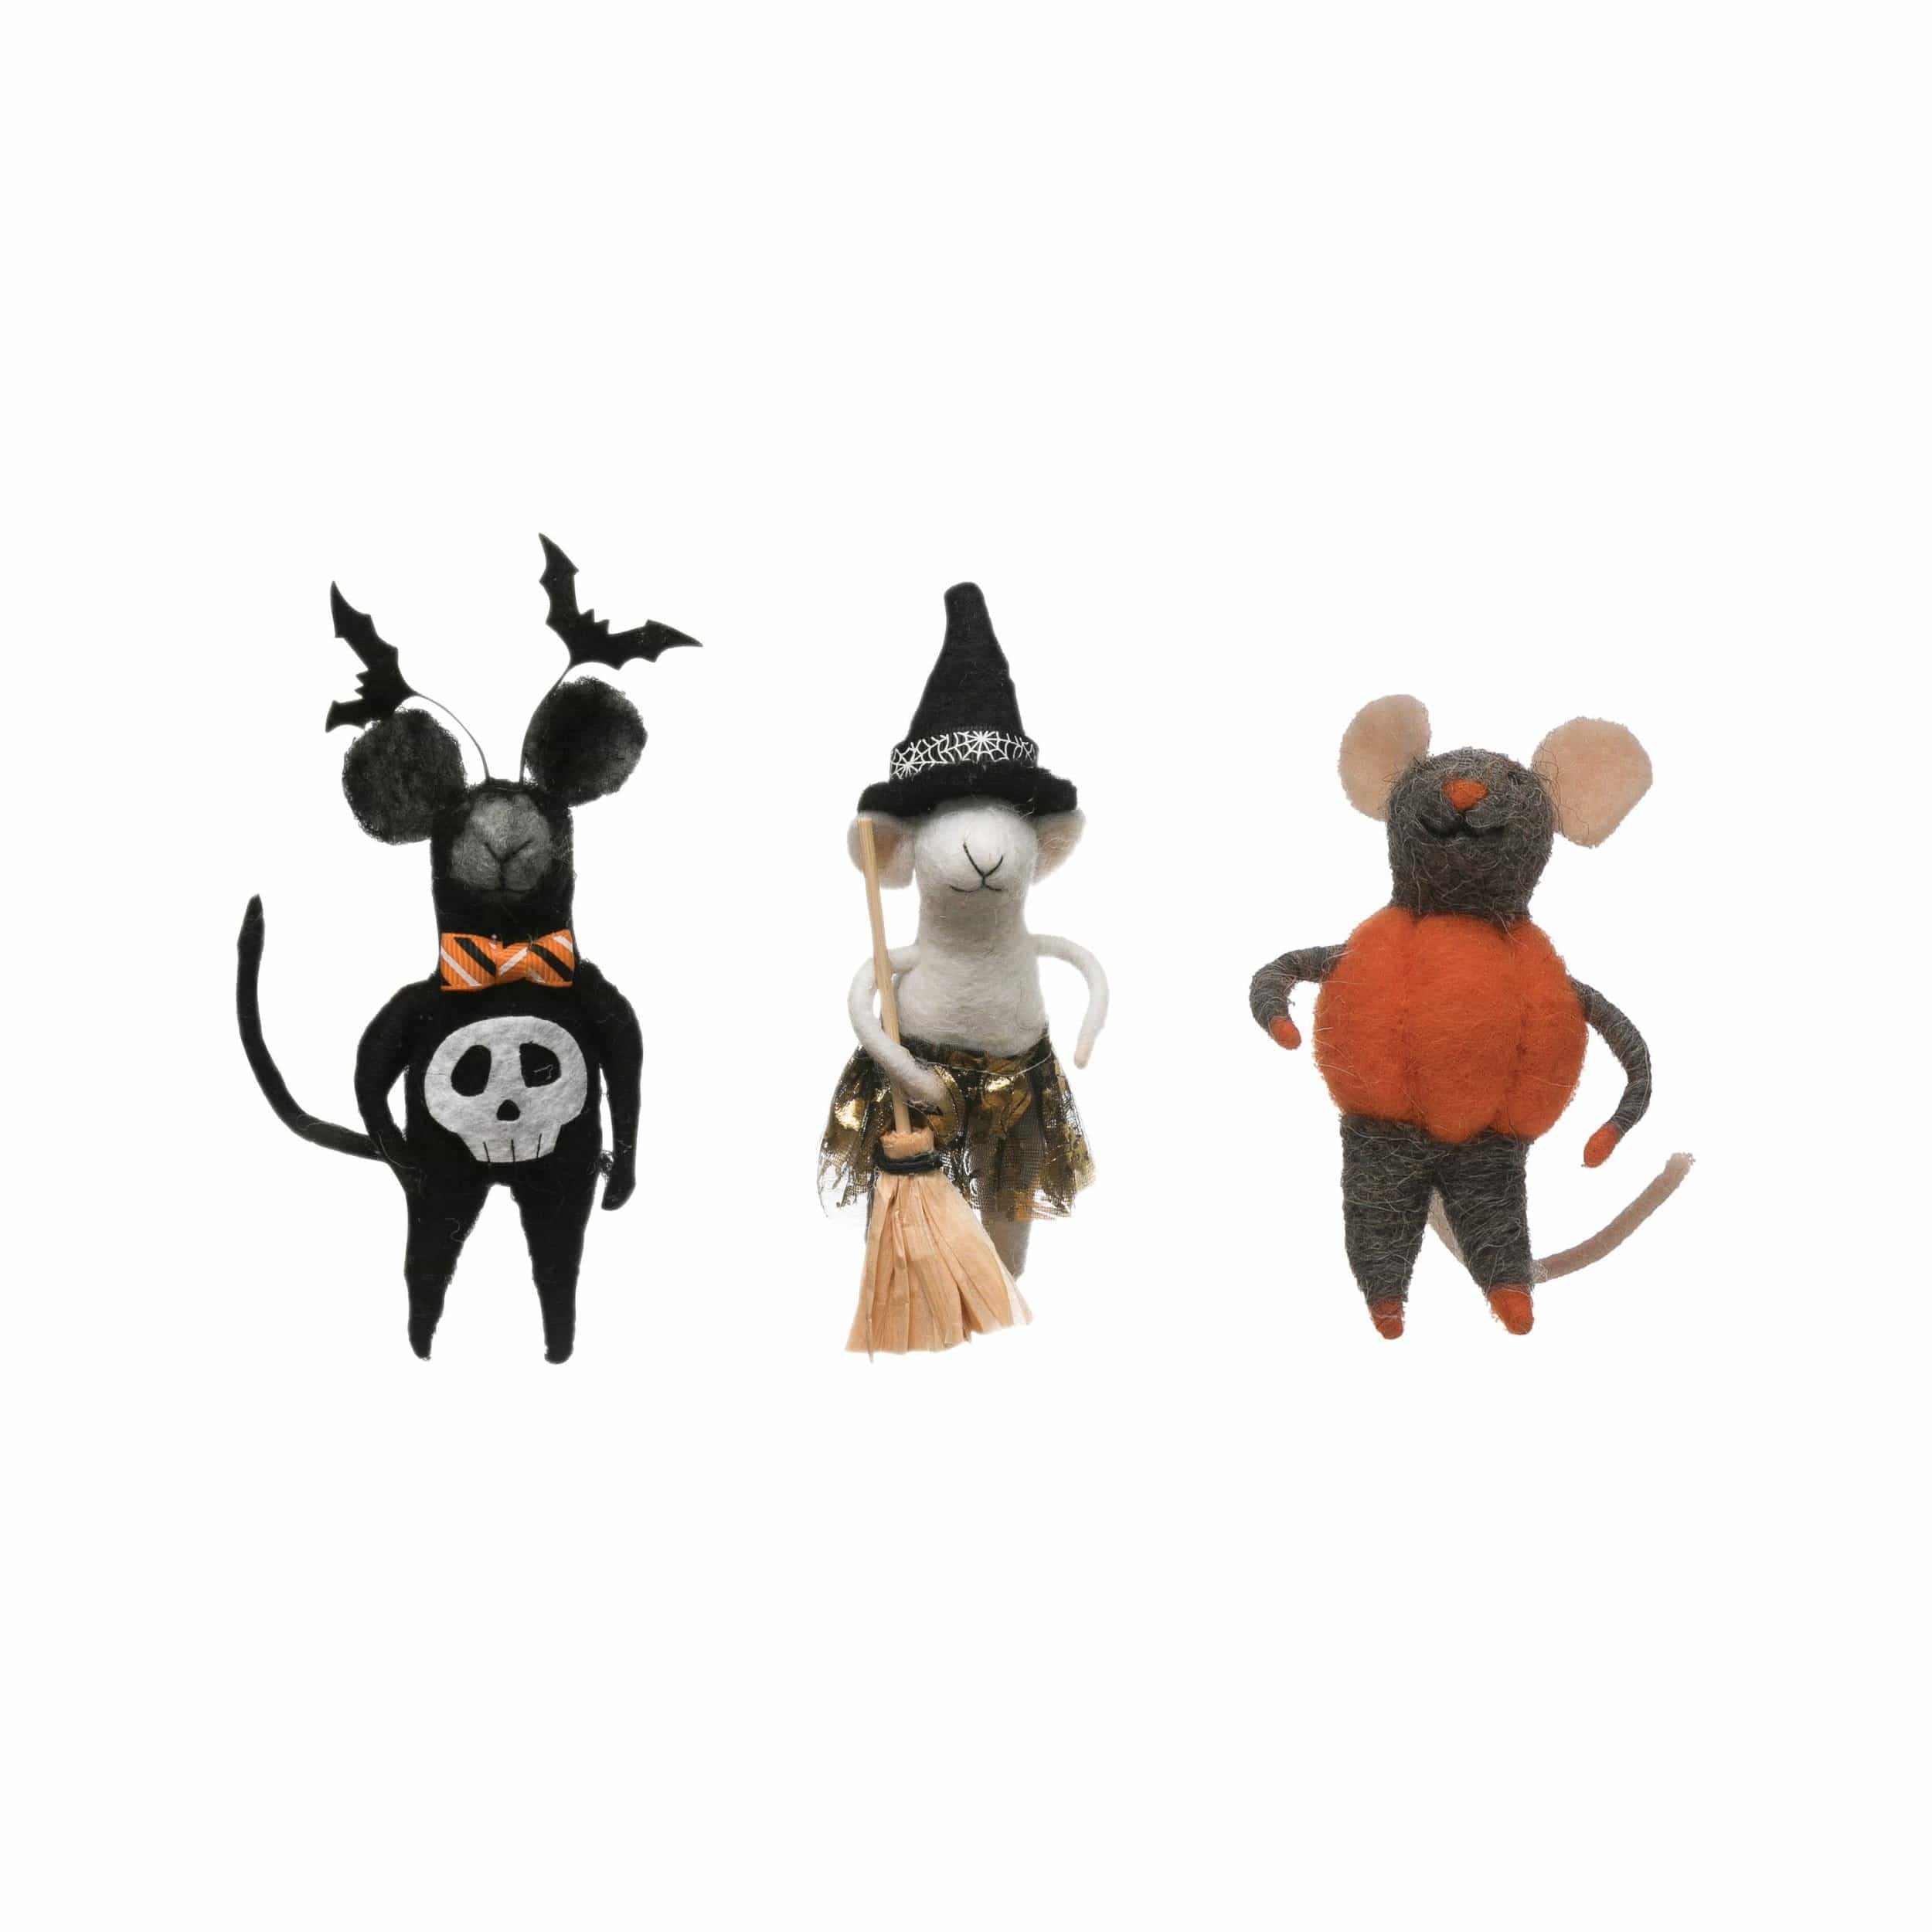 CCO - Creative Co-op Creative Co-op HX1804 6"H Wool Felt Mouse in Costume, 3 Styles - Little Miss Muffin Children & Home